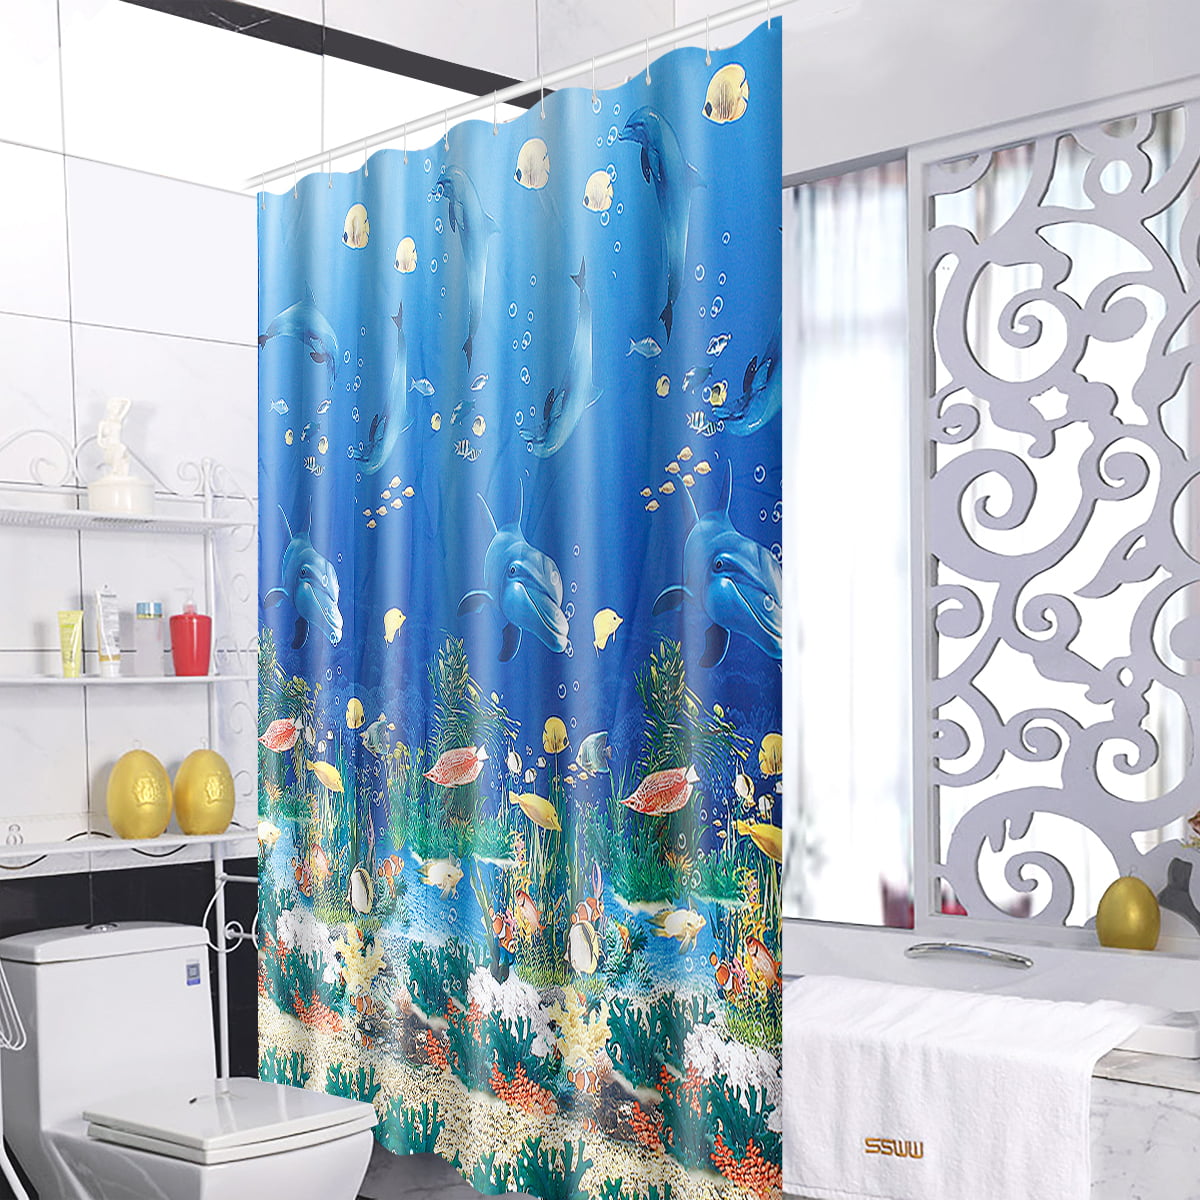 SHOWER CURTAINS CURTAIN ANIMAL DESIGN STANDARD SIZE 180 X 180CM WITH RINGS HOOKS 